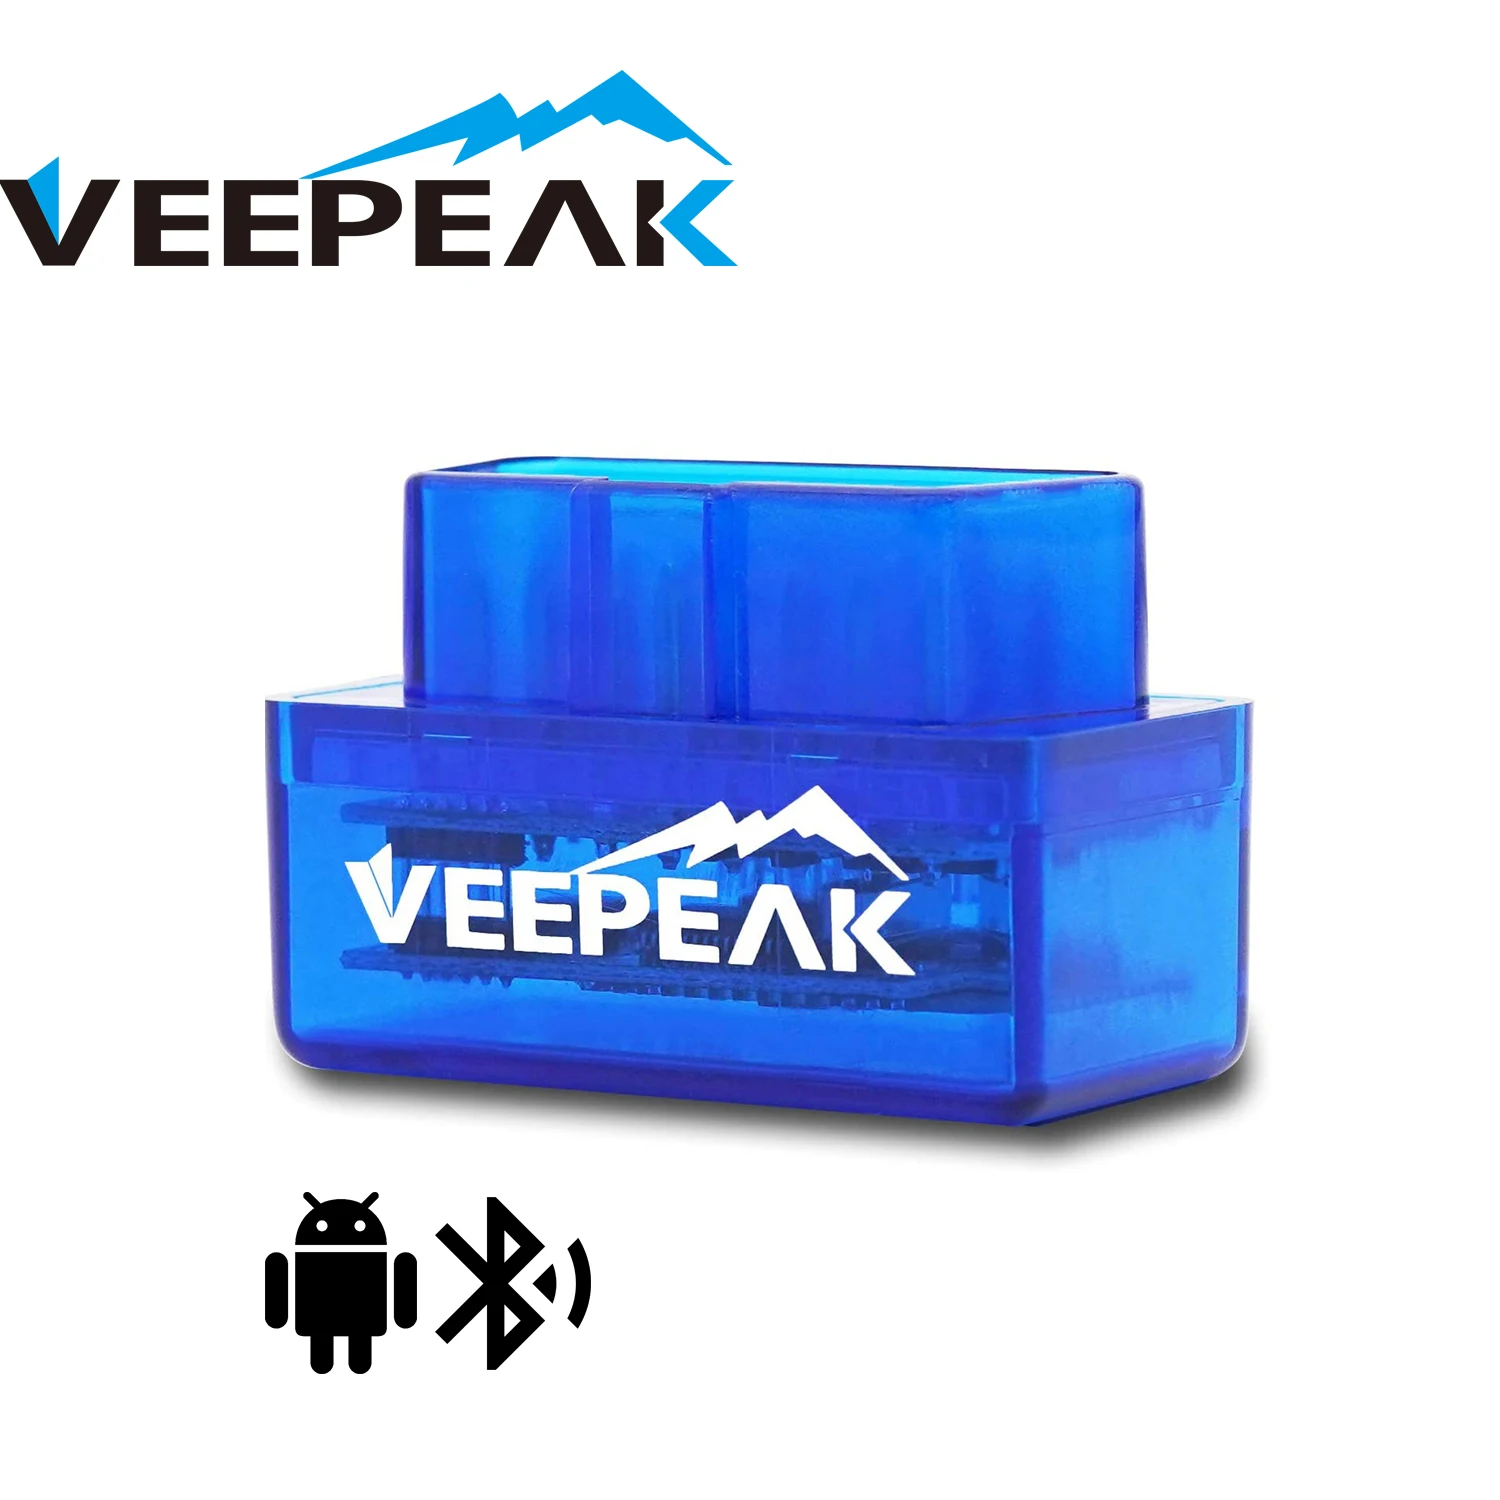 Veepeak Mini Bluetooth OBD2 Scanner for Android, Car OBD II Diagnostic Scan Tool Check Engine Light Code Reader, Supports Torque veepeak mini bluetooth obd2 scanner for android car obd ii diagnostic scan tool check engine light code reader supports torque